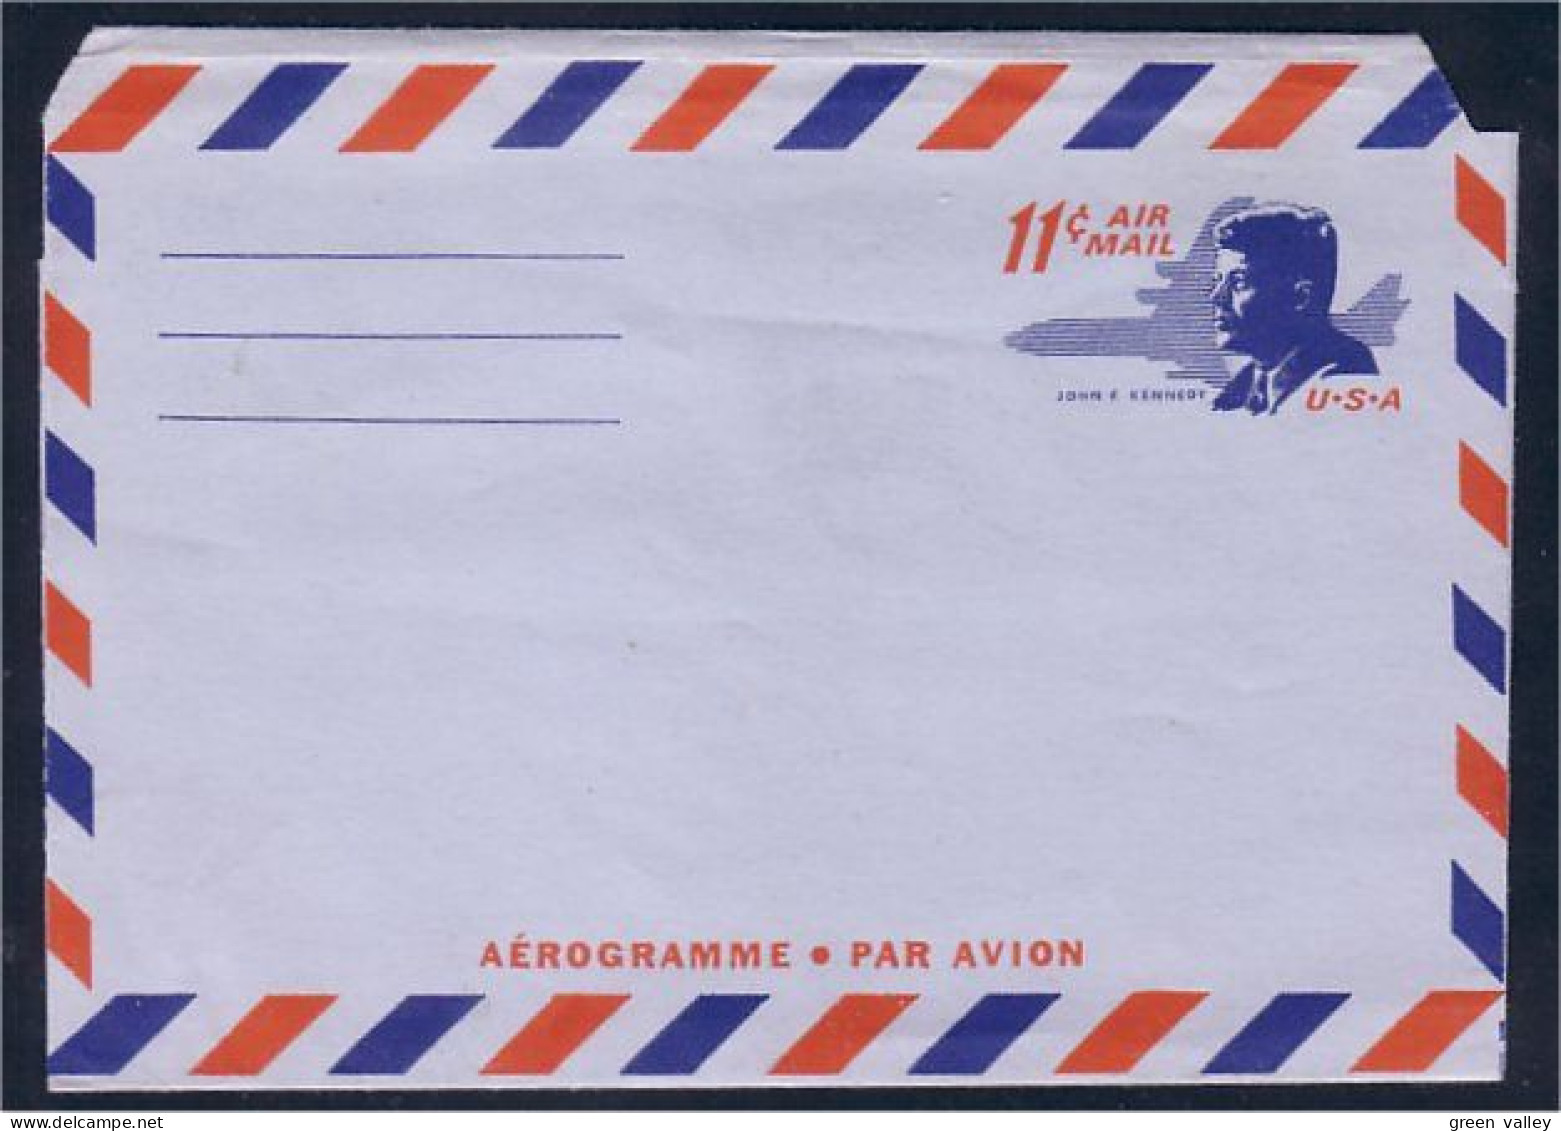 Aerogramme Air Letter Kennedy 11c Air Mail ( A82 109) - Us Independence